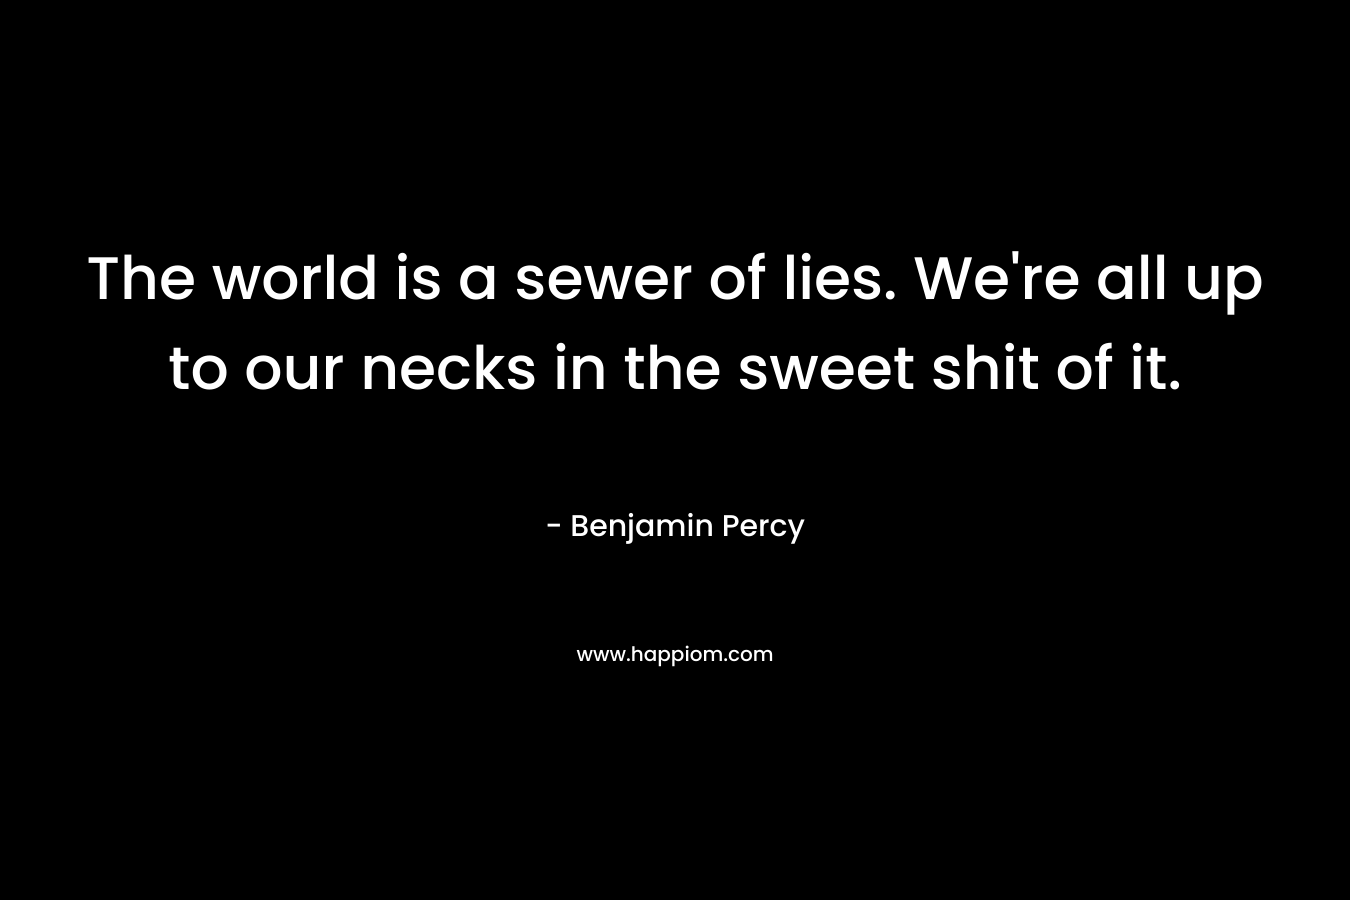 The world is a sewer of lies. We're all up to our necks in the sweet shit of it.